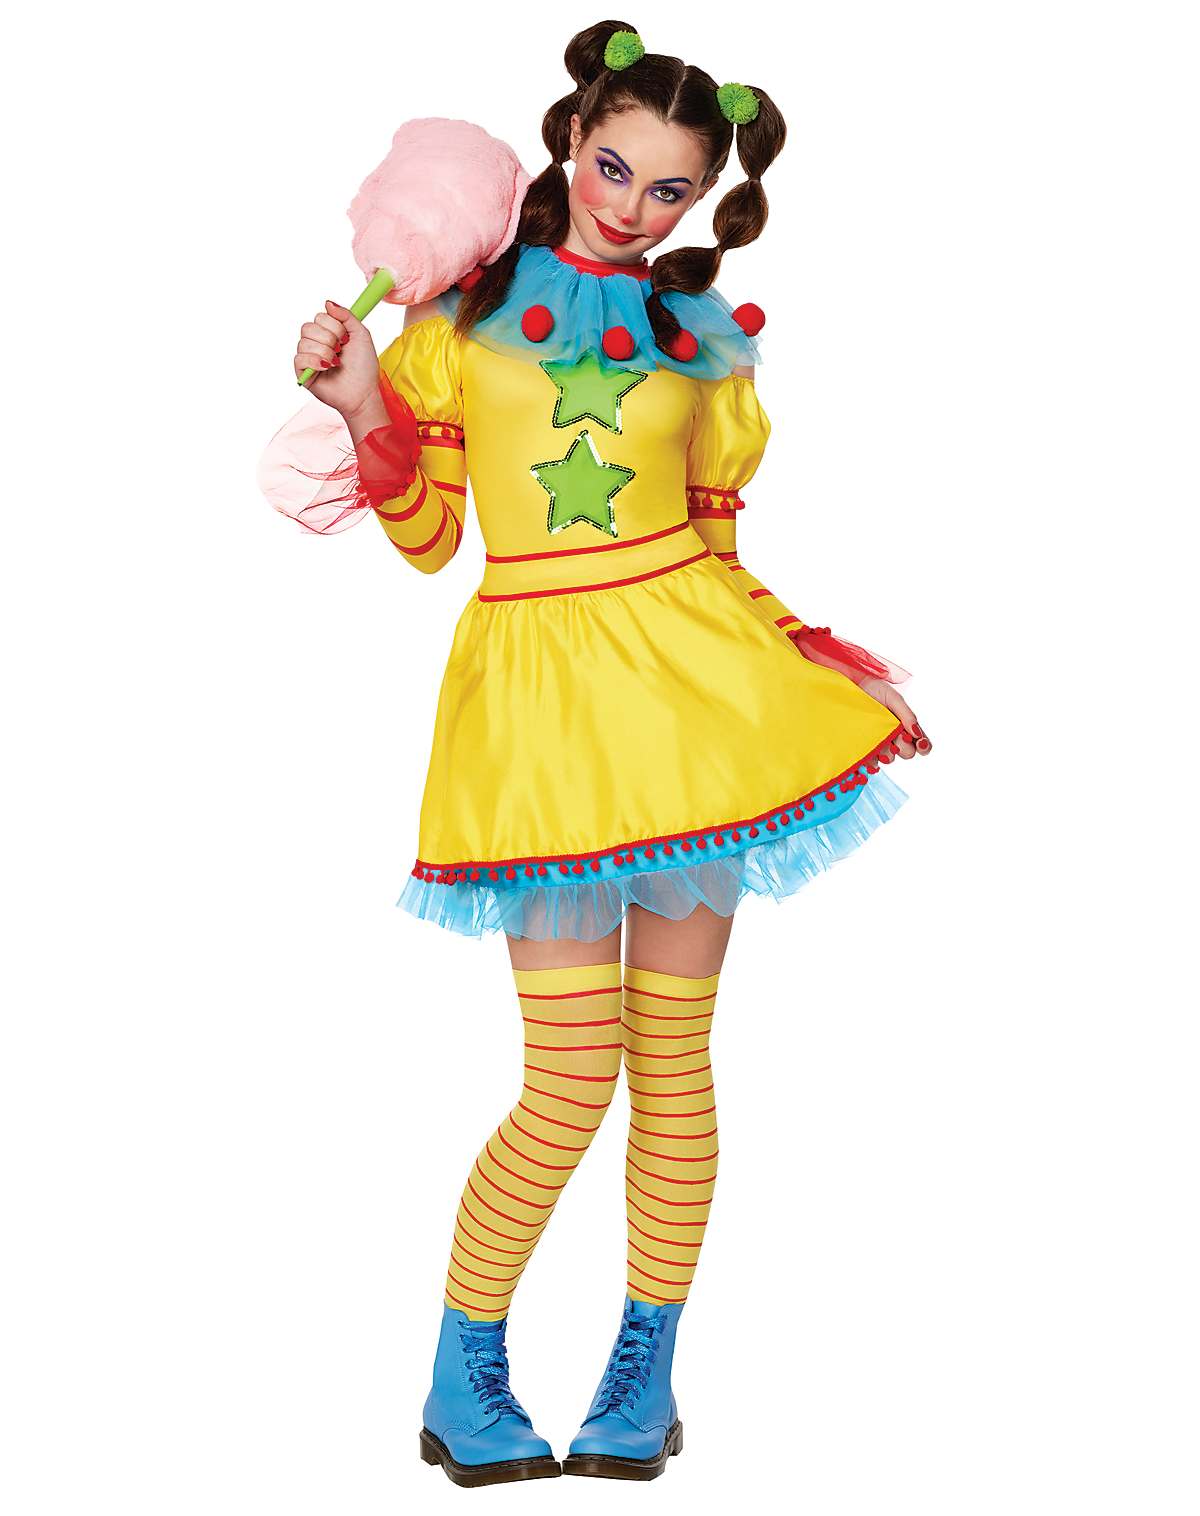 Adult Shorty Dress Costume - Killer Klowns from Outer Space